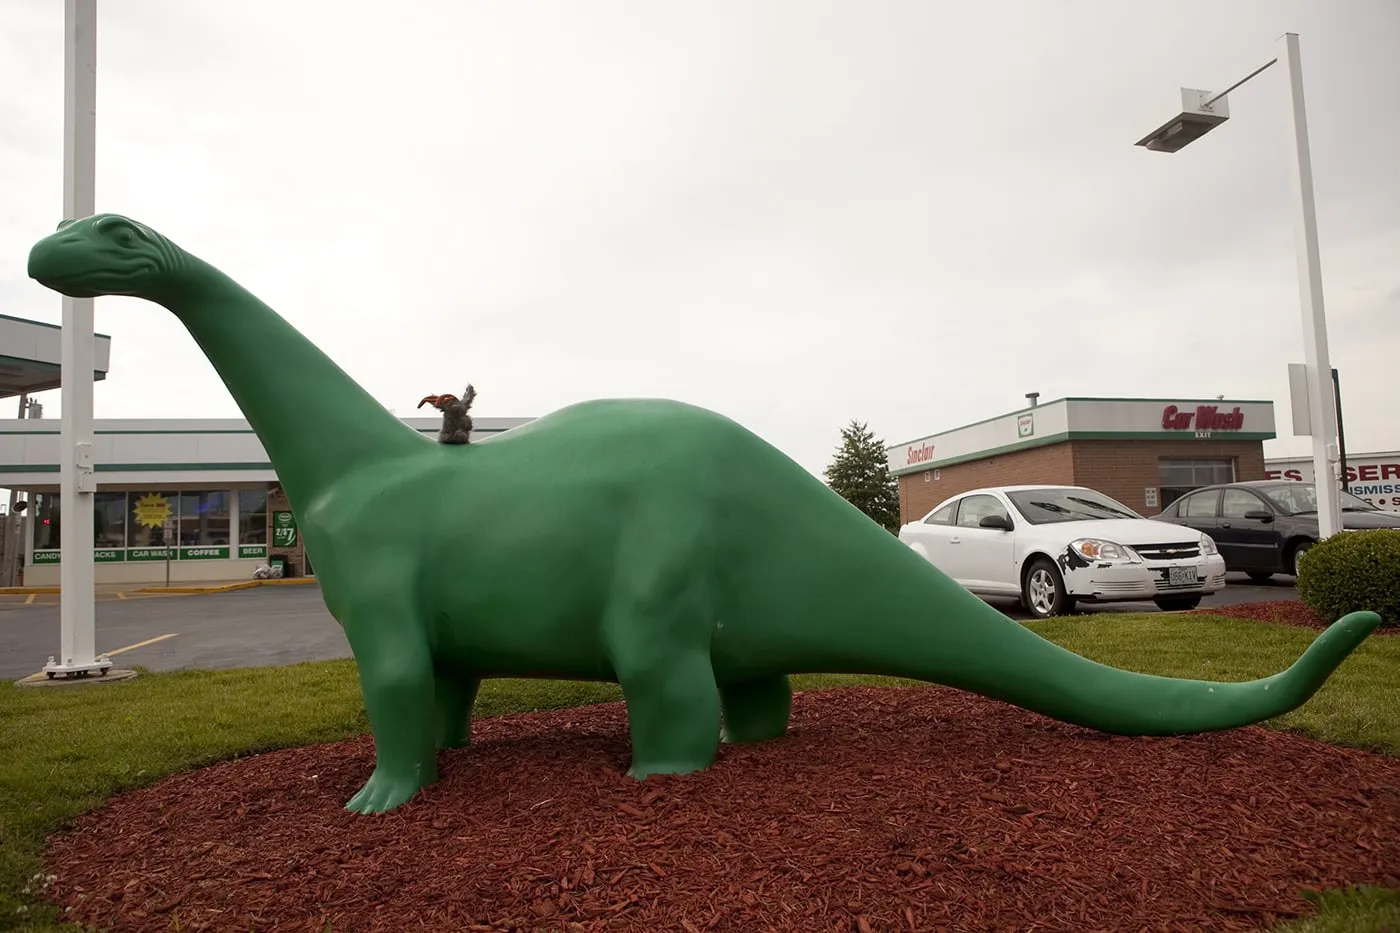 Flopsy the Jackalope with a Sinclair Station Dinosaur in Missouri